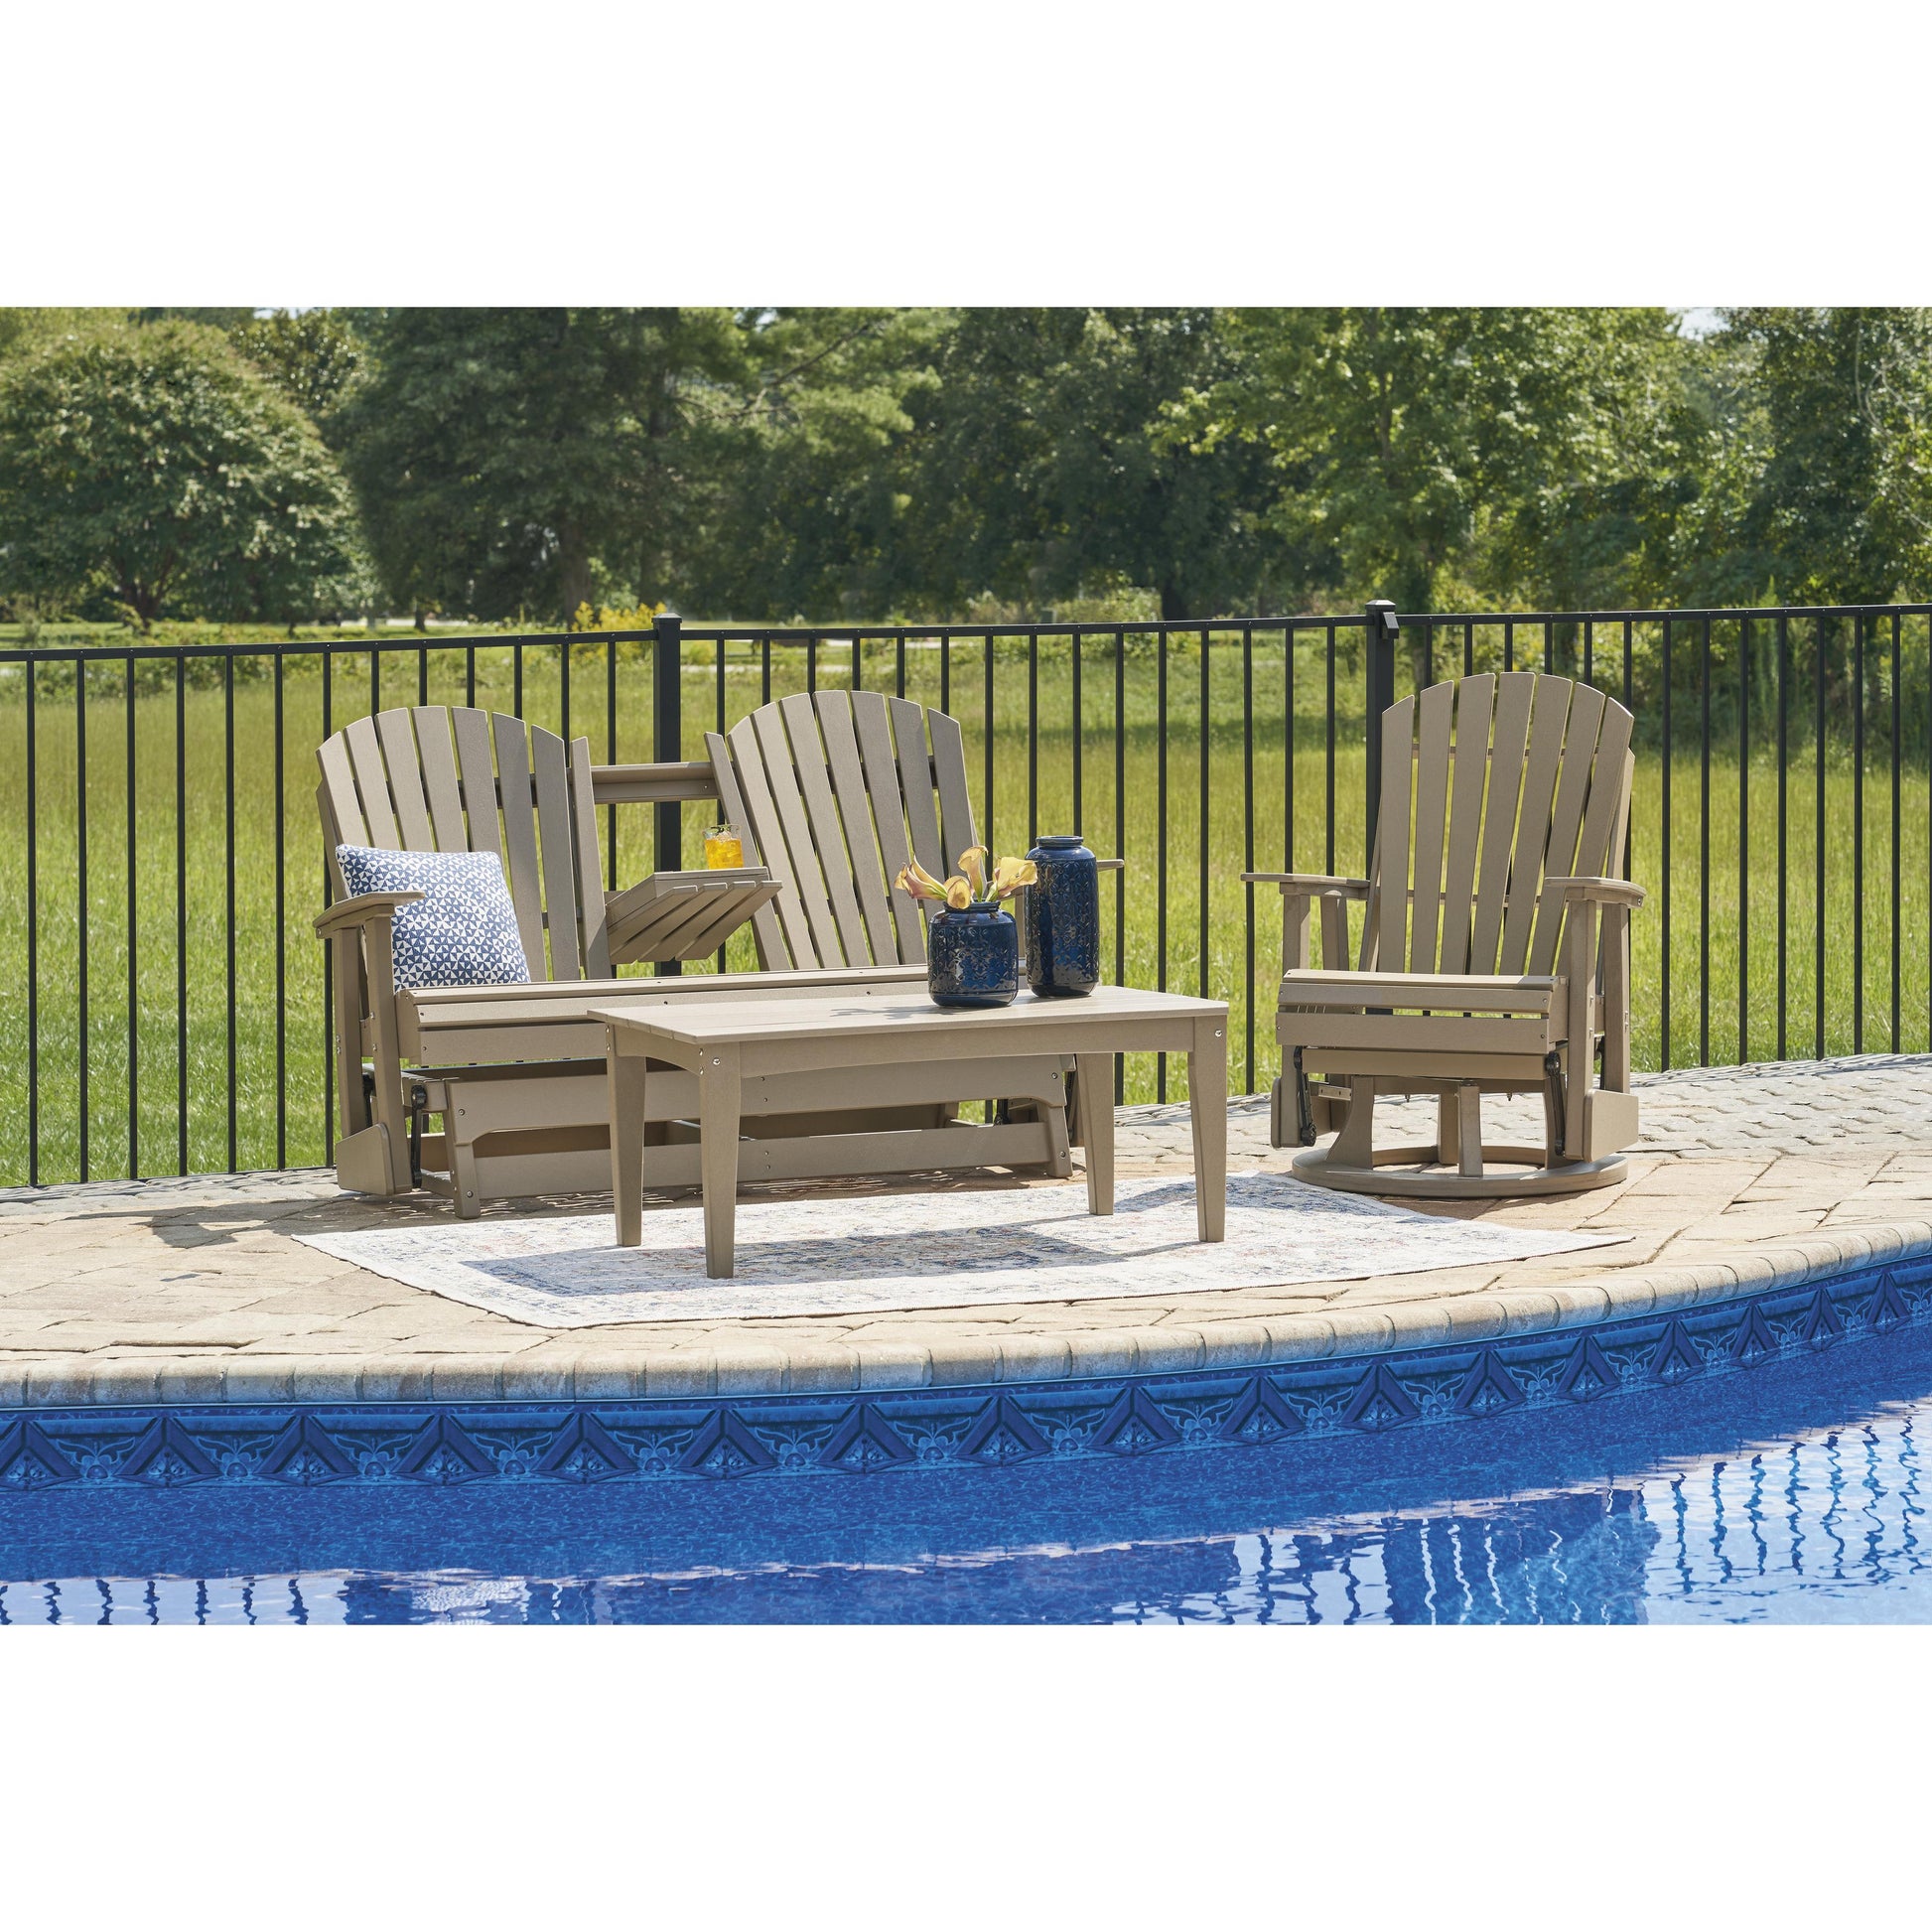 Signature Design by Ashley Outdoor Seating Loveseats P114-835 IMAGE 12